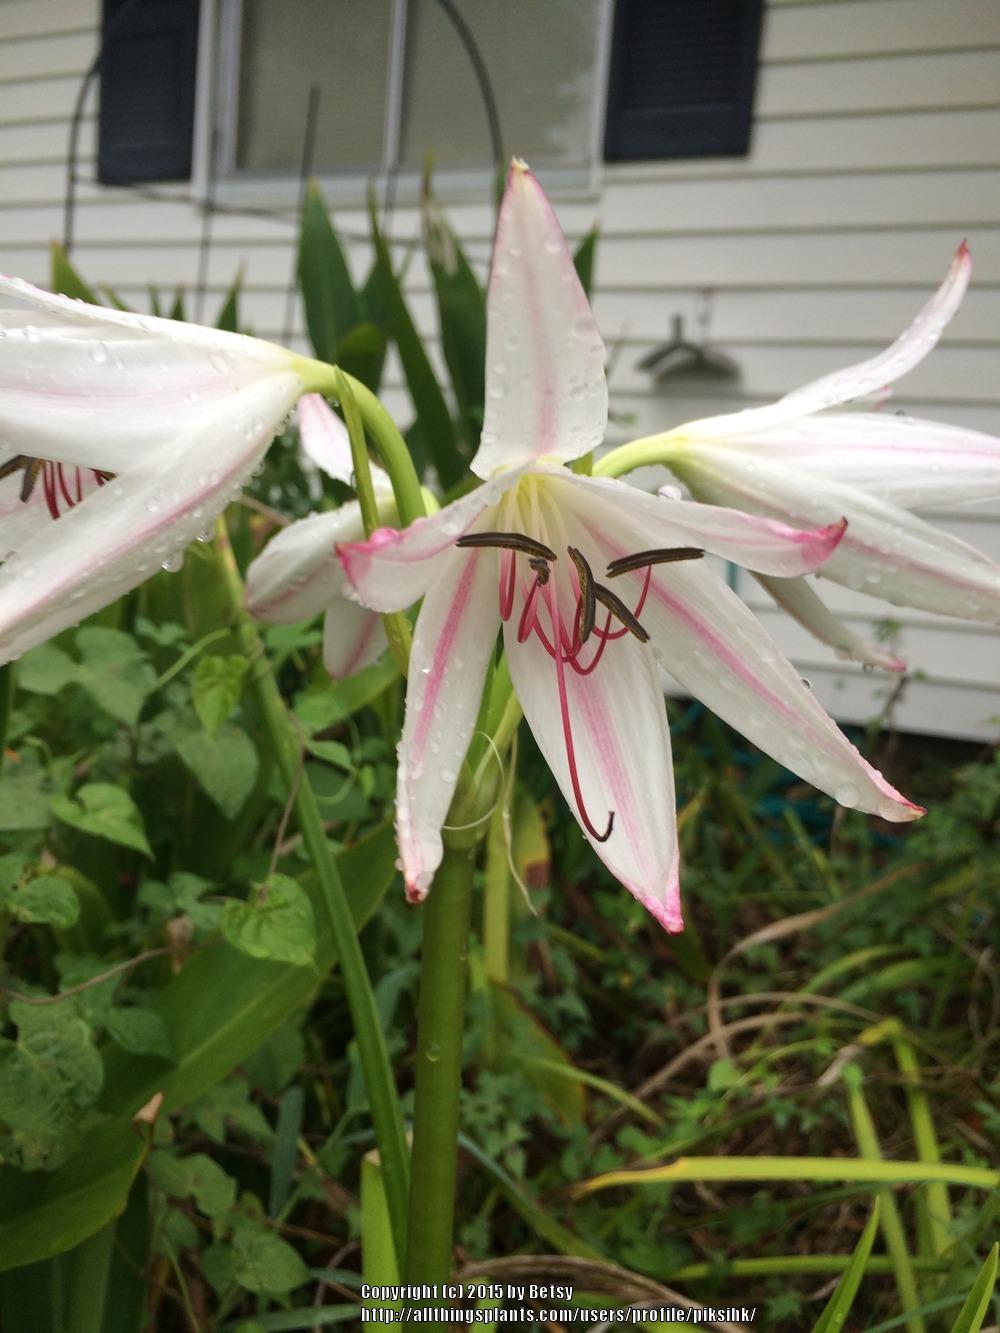 Photo of Crinums (Crinum) uploaded by piksihk